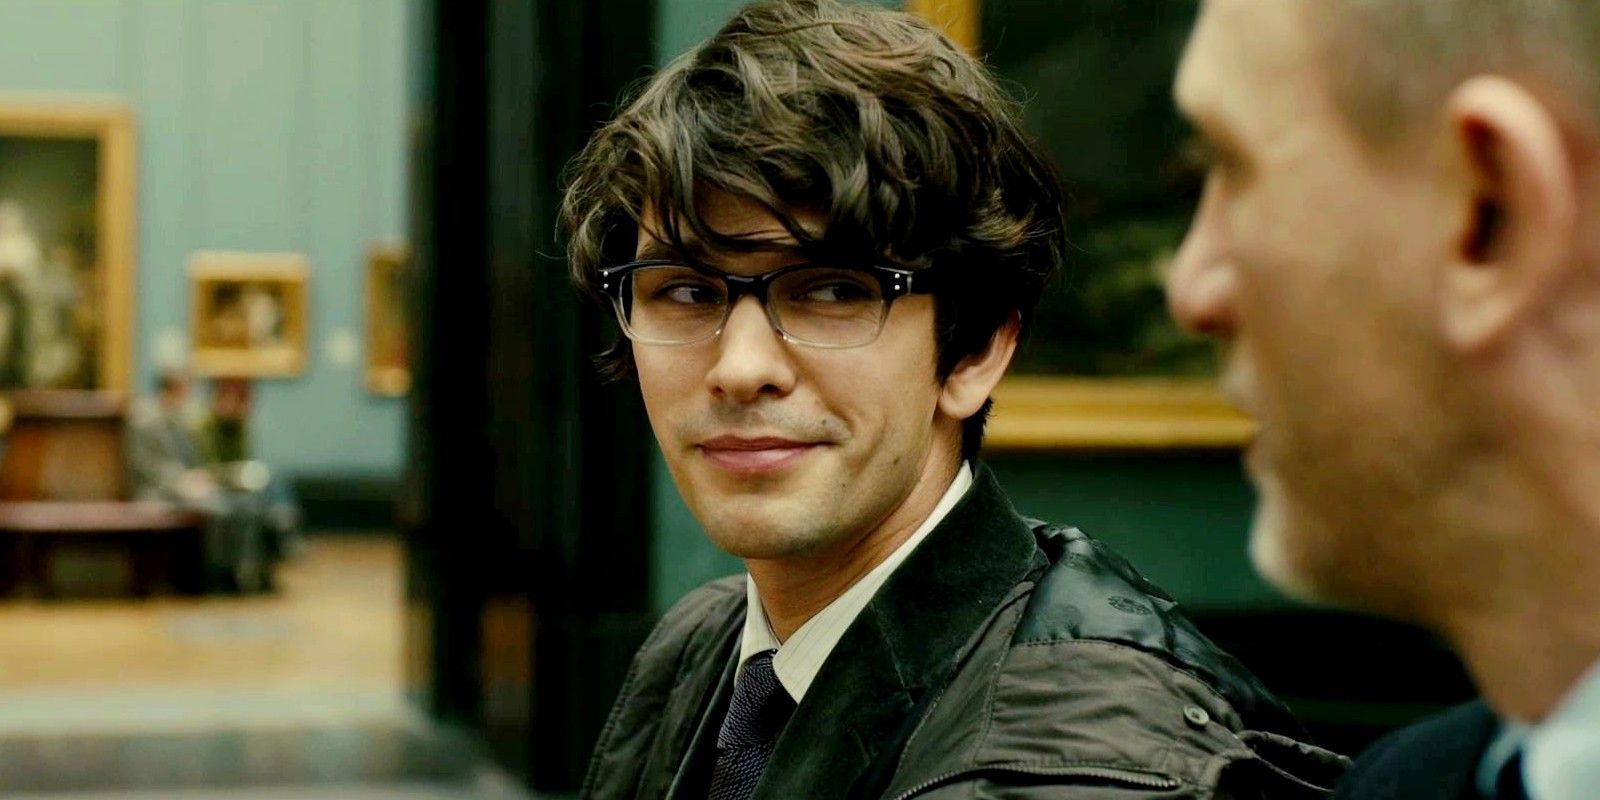 Ben Wishaw as Q in Skyfall